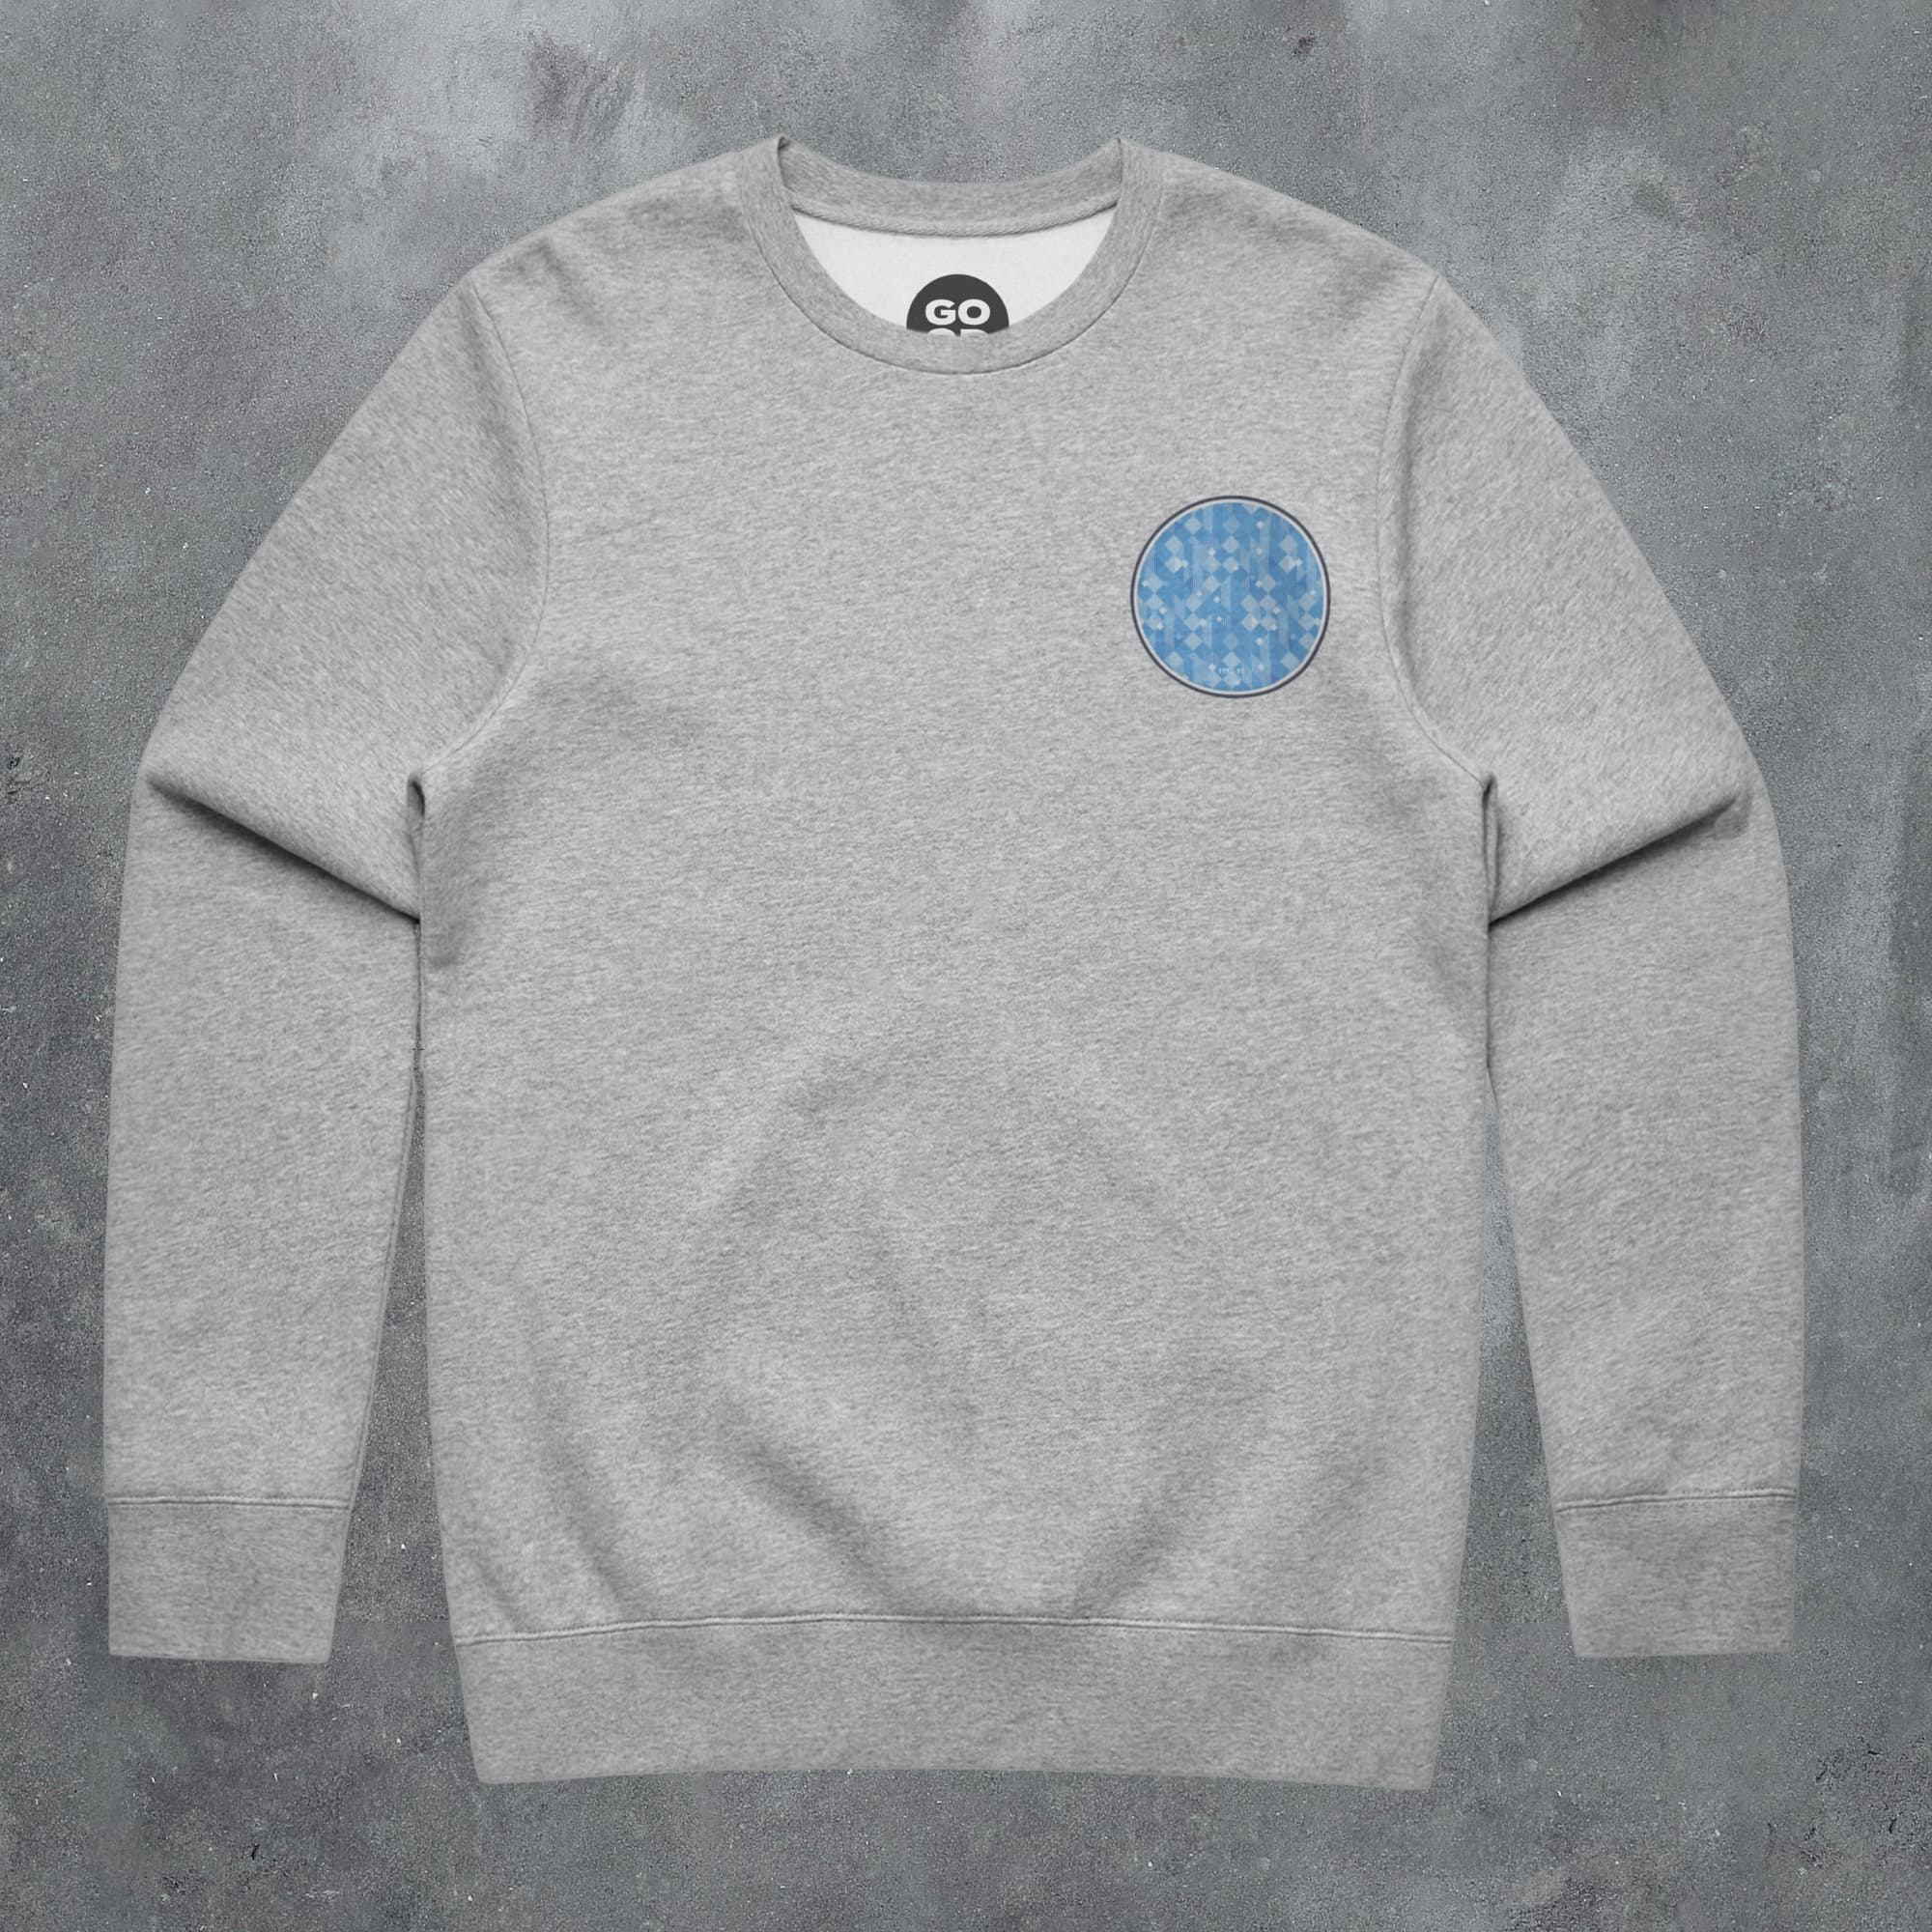 a grey sweatshirt with a blue circle on the front